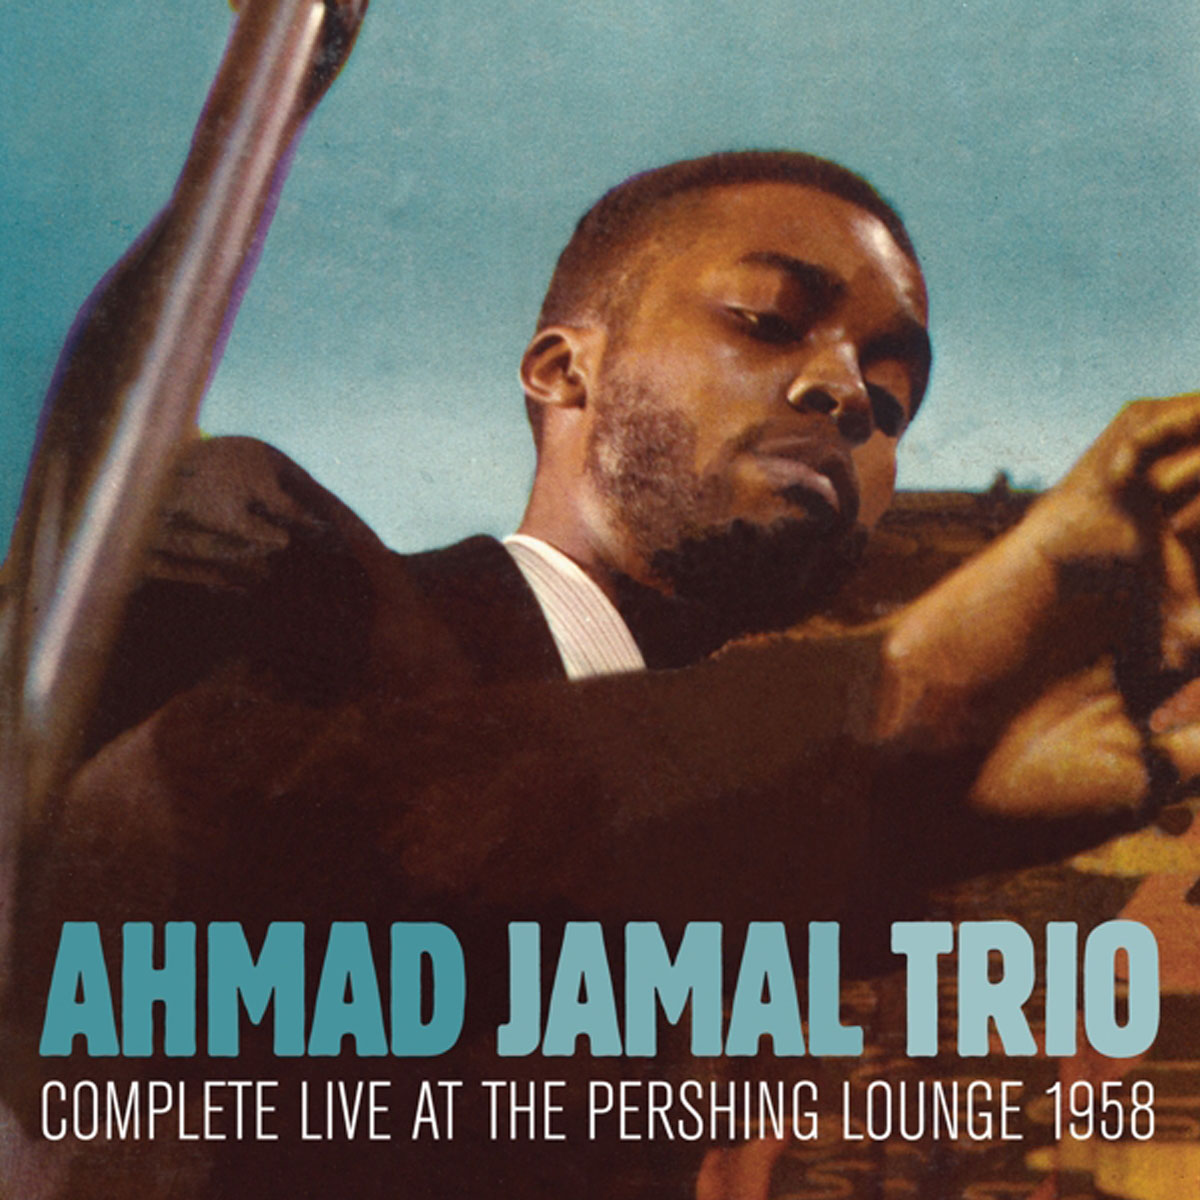 Complete Live At The Pershing Lounge 1958 + 1 Bonustrack